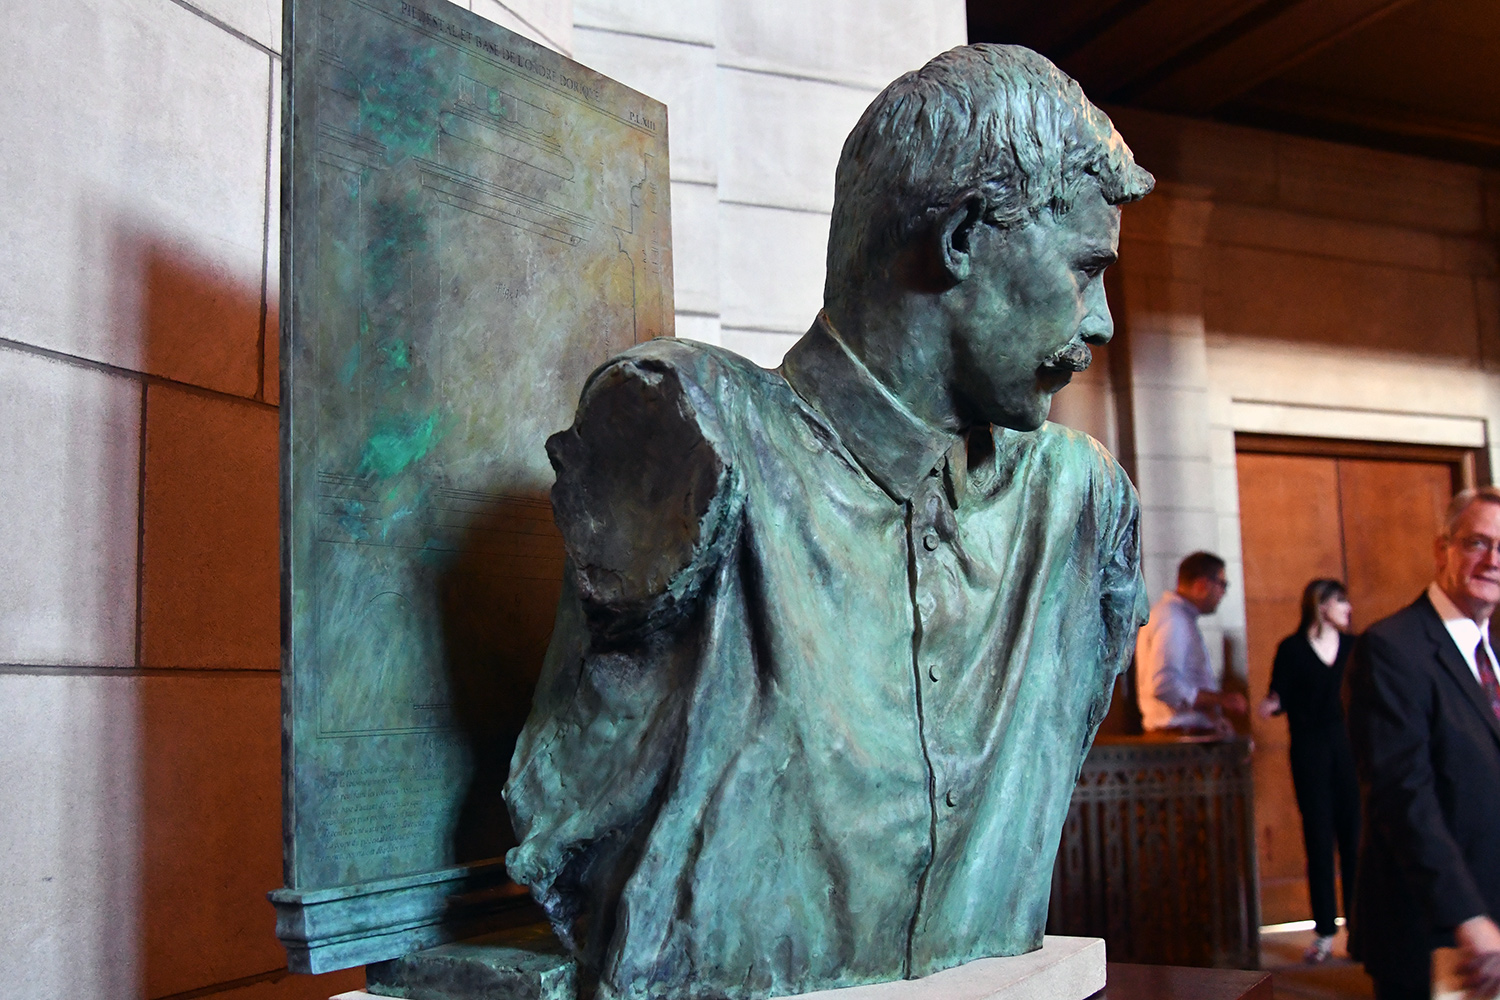 Bust of Thomas Kimball from the left